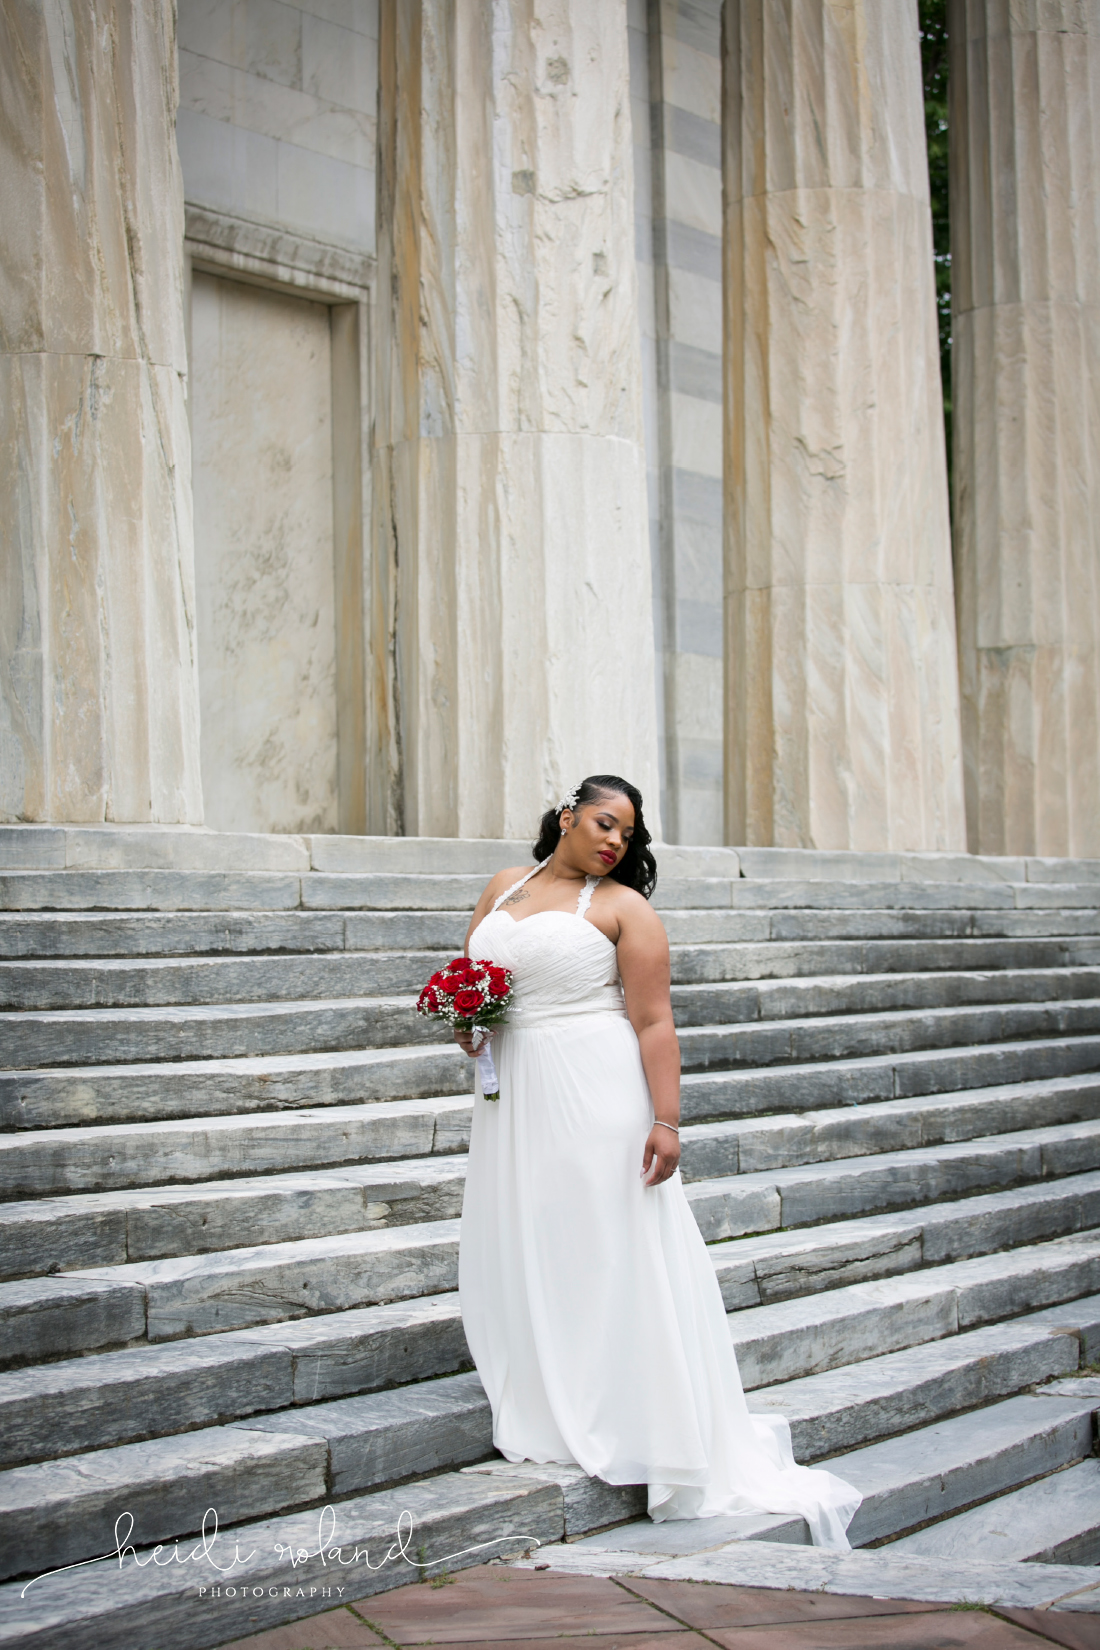 Bride glamour portraits in front of columns at Second National Bank